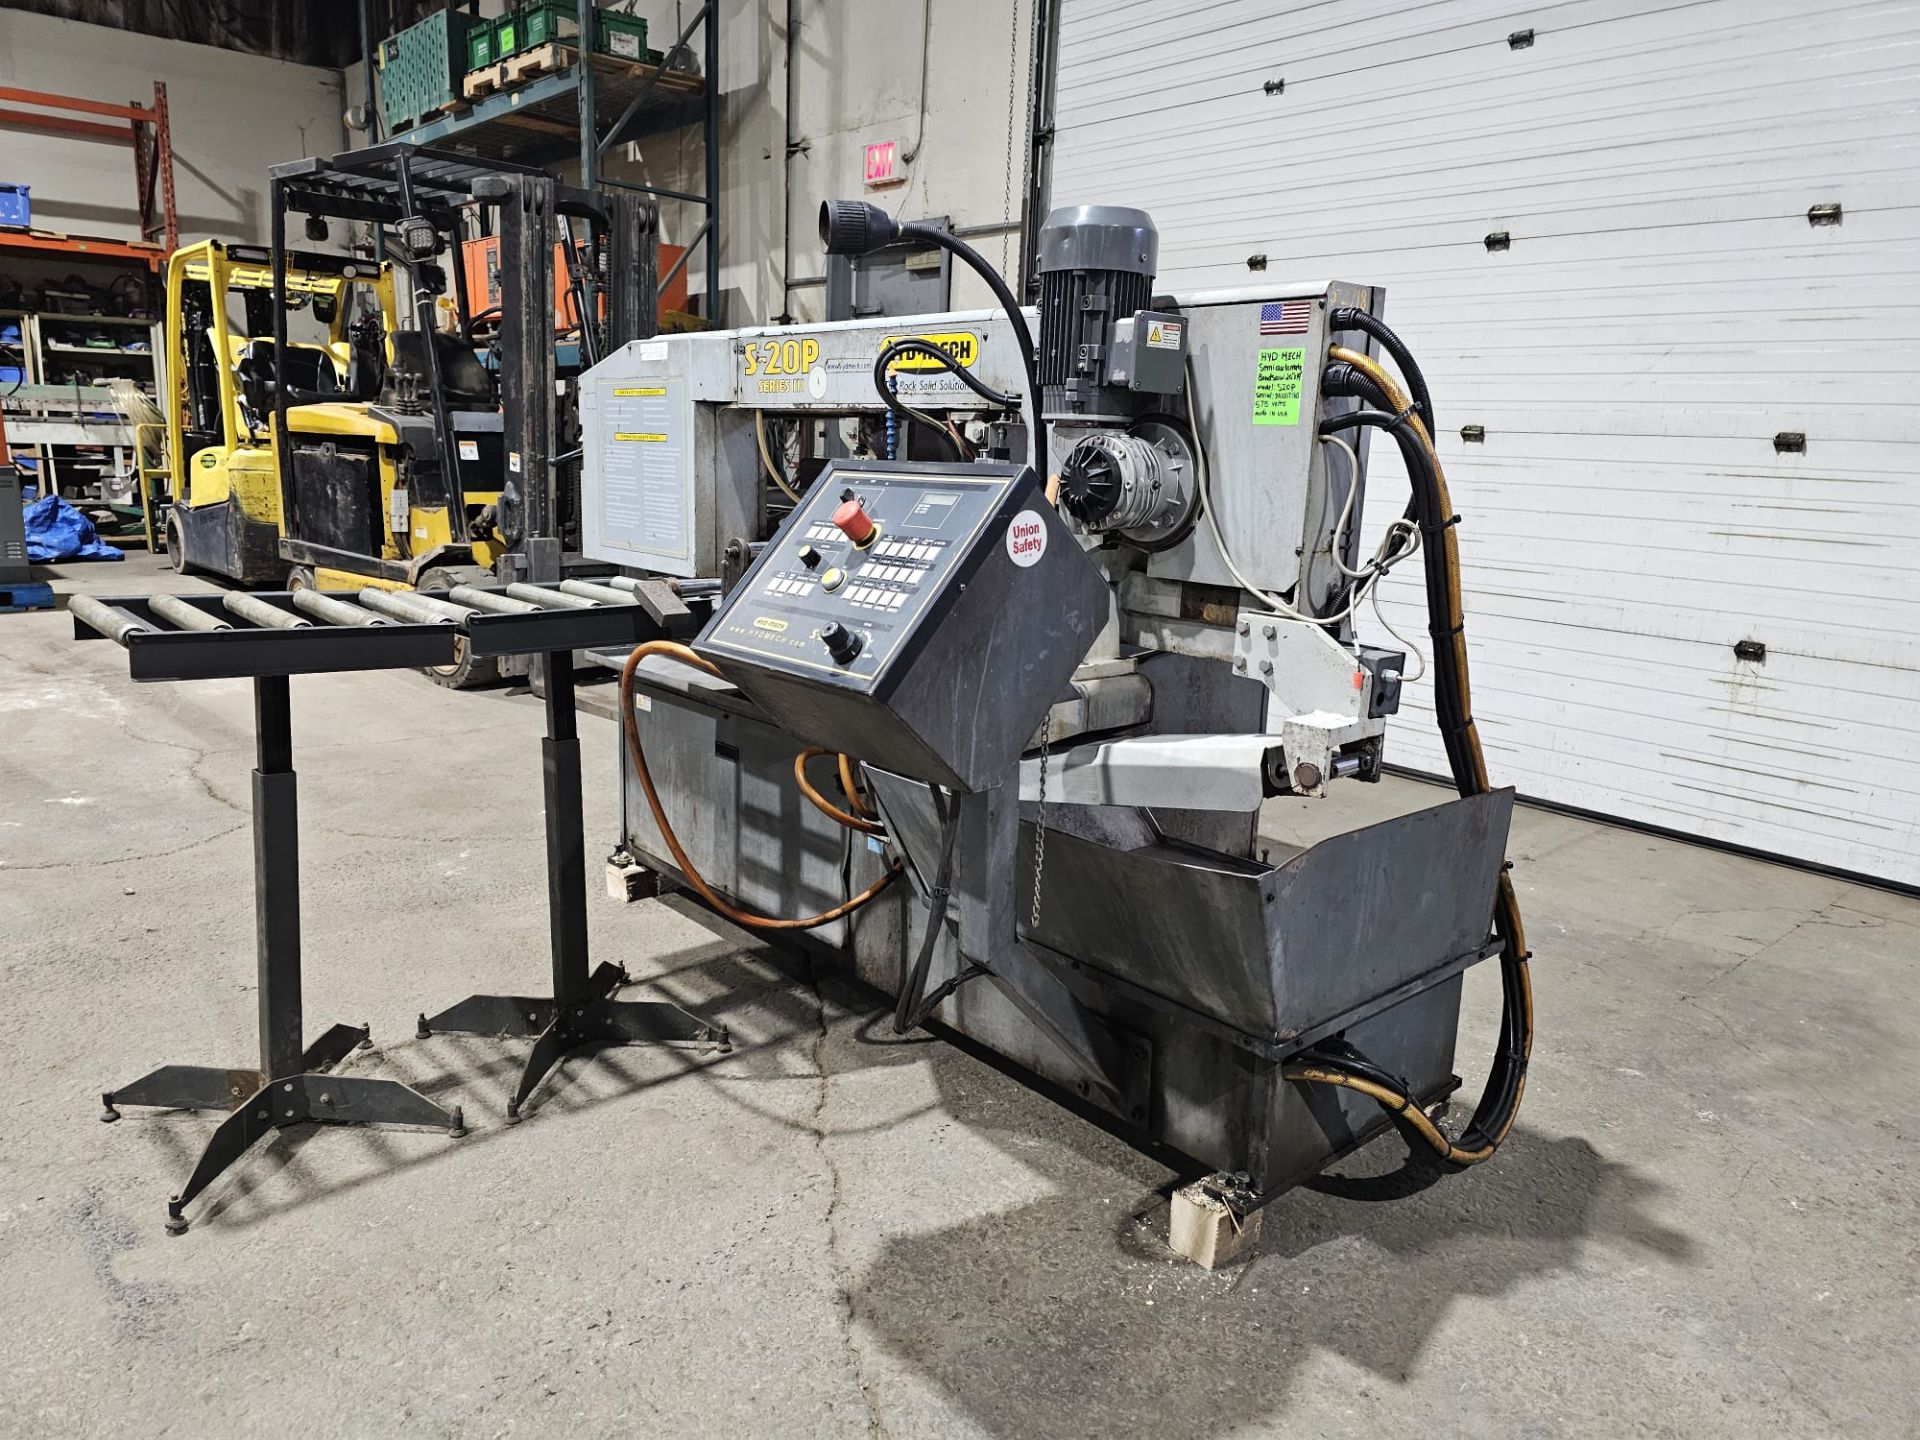 Hyd-Mech Semi Automatic Bandsaw 20" x 14" Cutting Capacity Model: S20P 3 phase - Image 16 of 17